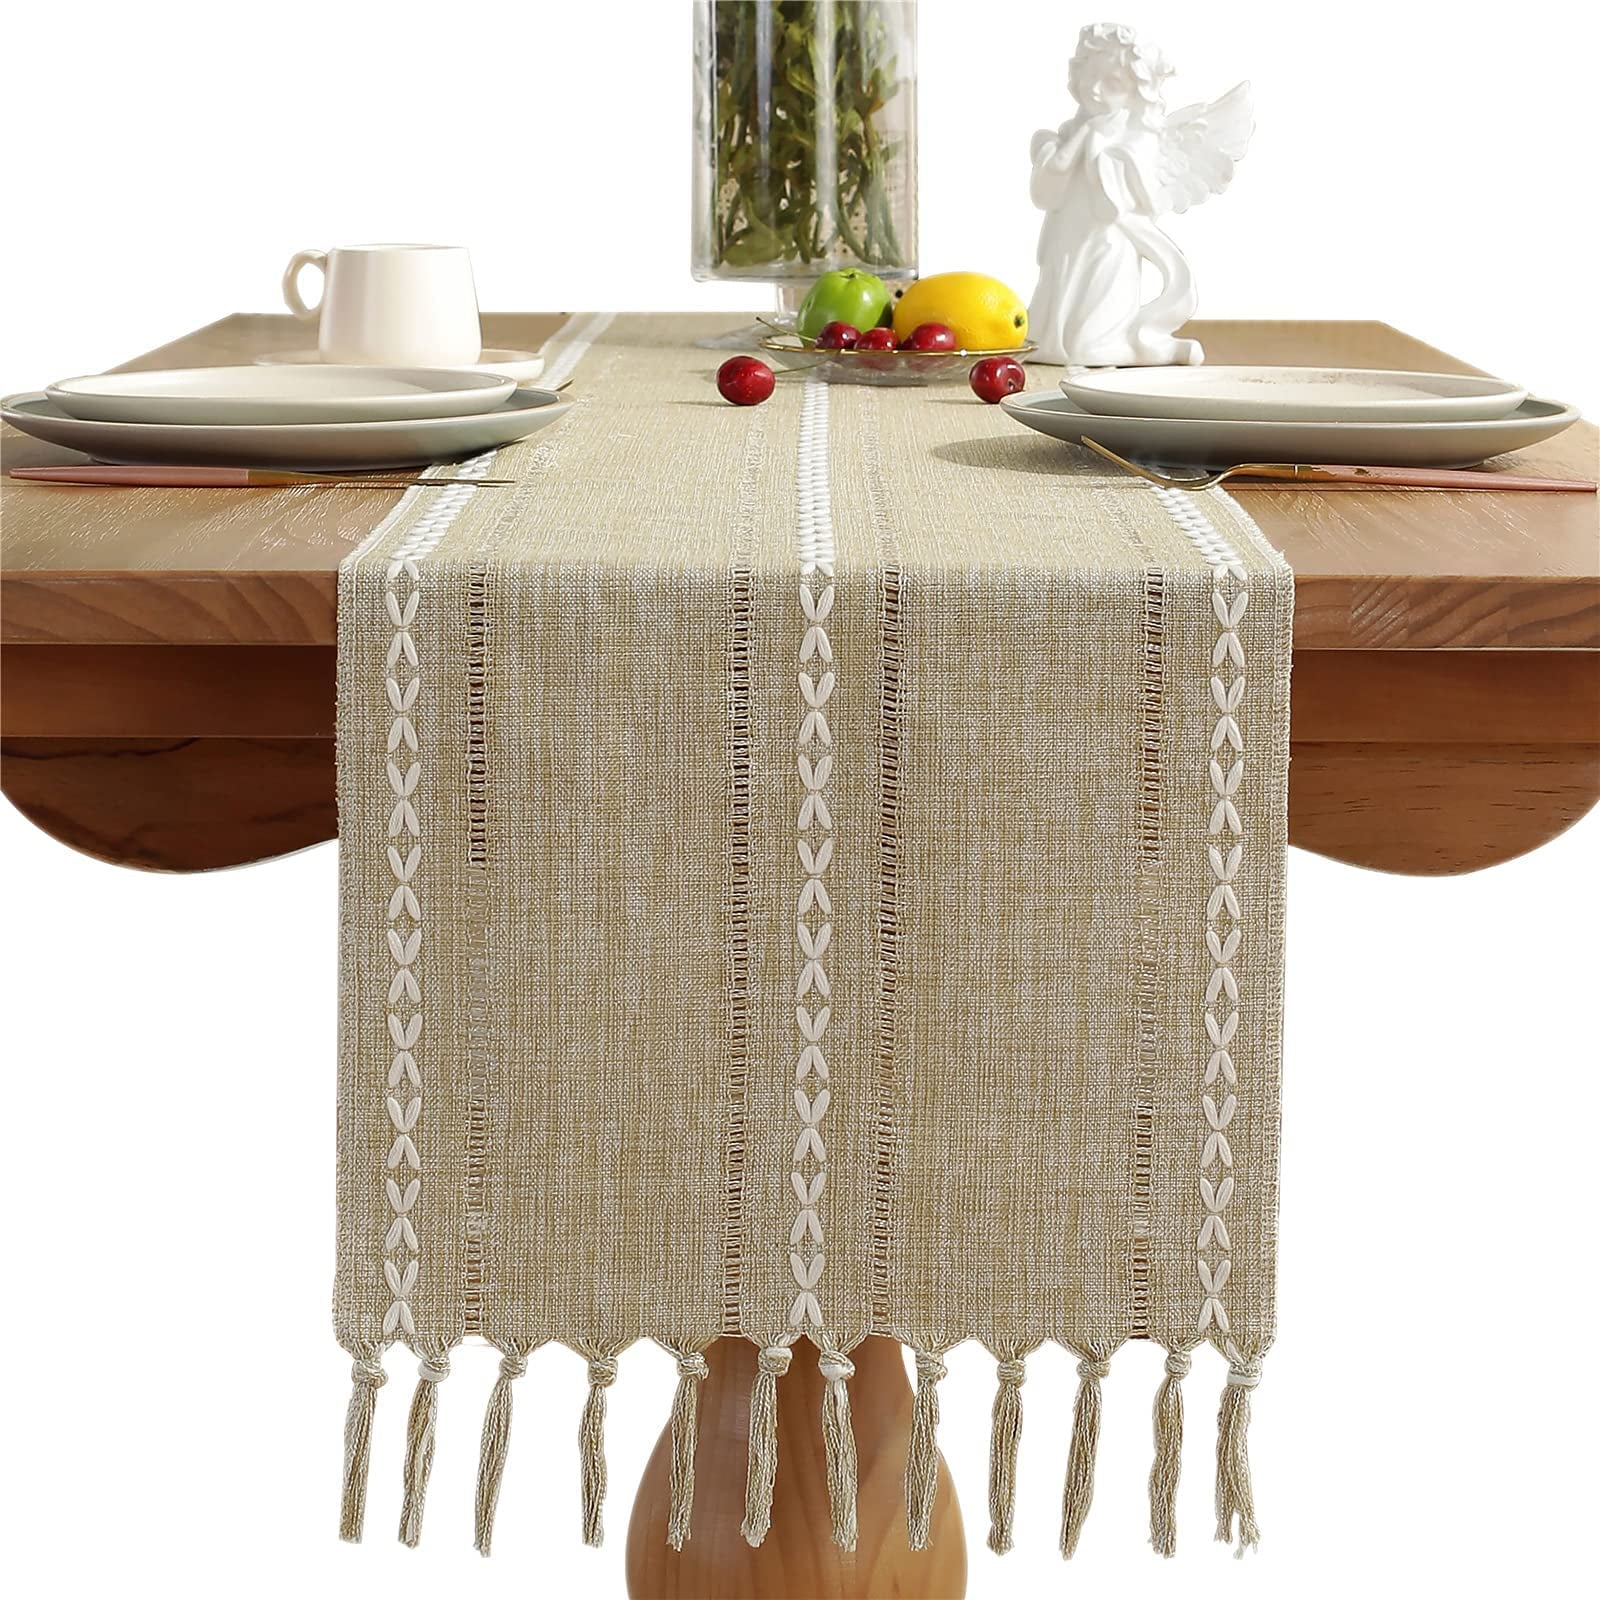 Husfou Table Runners with Tassels, 13x72in Woven Hollow Table Linens, Boho Linen Table Runner for Bohemian Wedding Bridal Shower Rustic Farmhouse